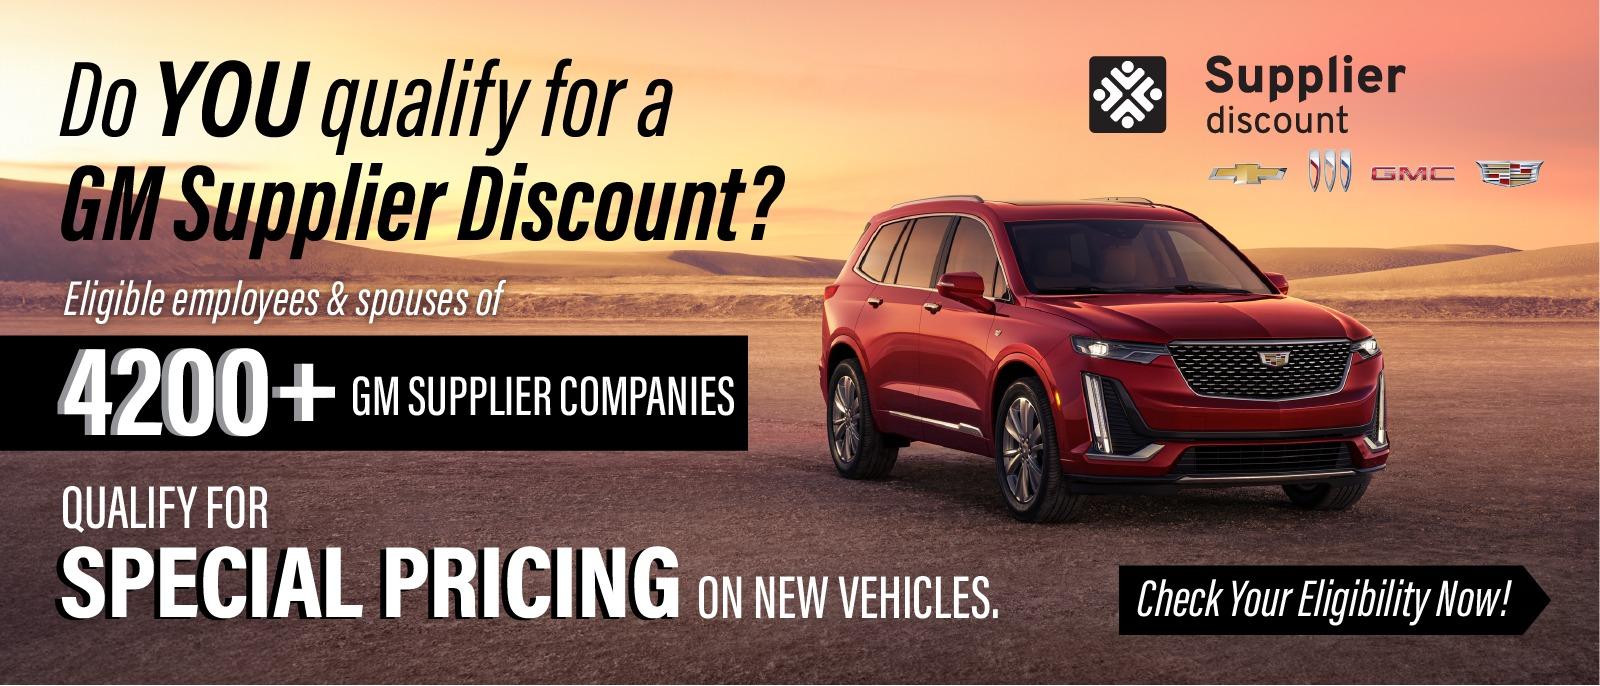 Do you qualify for a GM Supplier Discount? Eligible employees and spouses of 4200+ GM Supplier comapnies qualify for special pricing on new vehicles. Check your eligibility now.